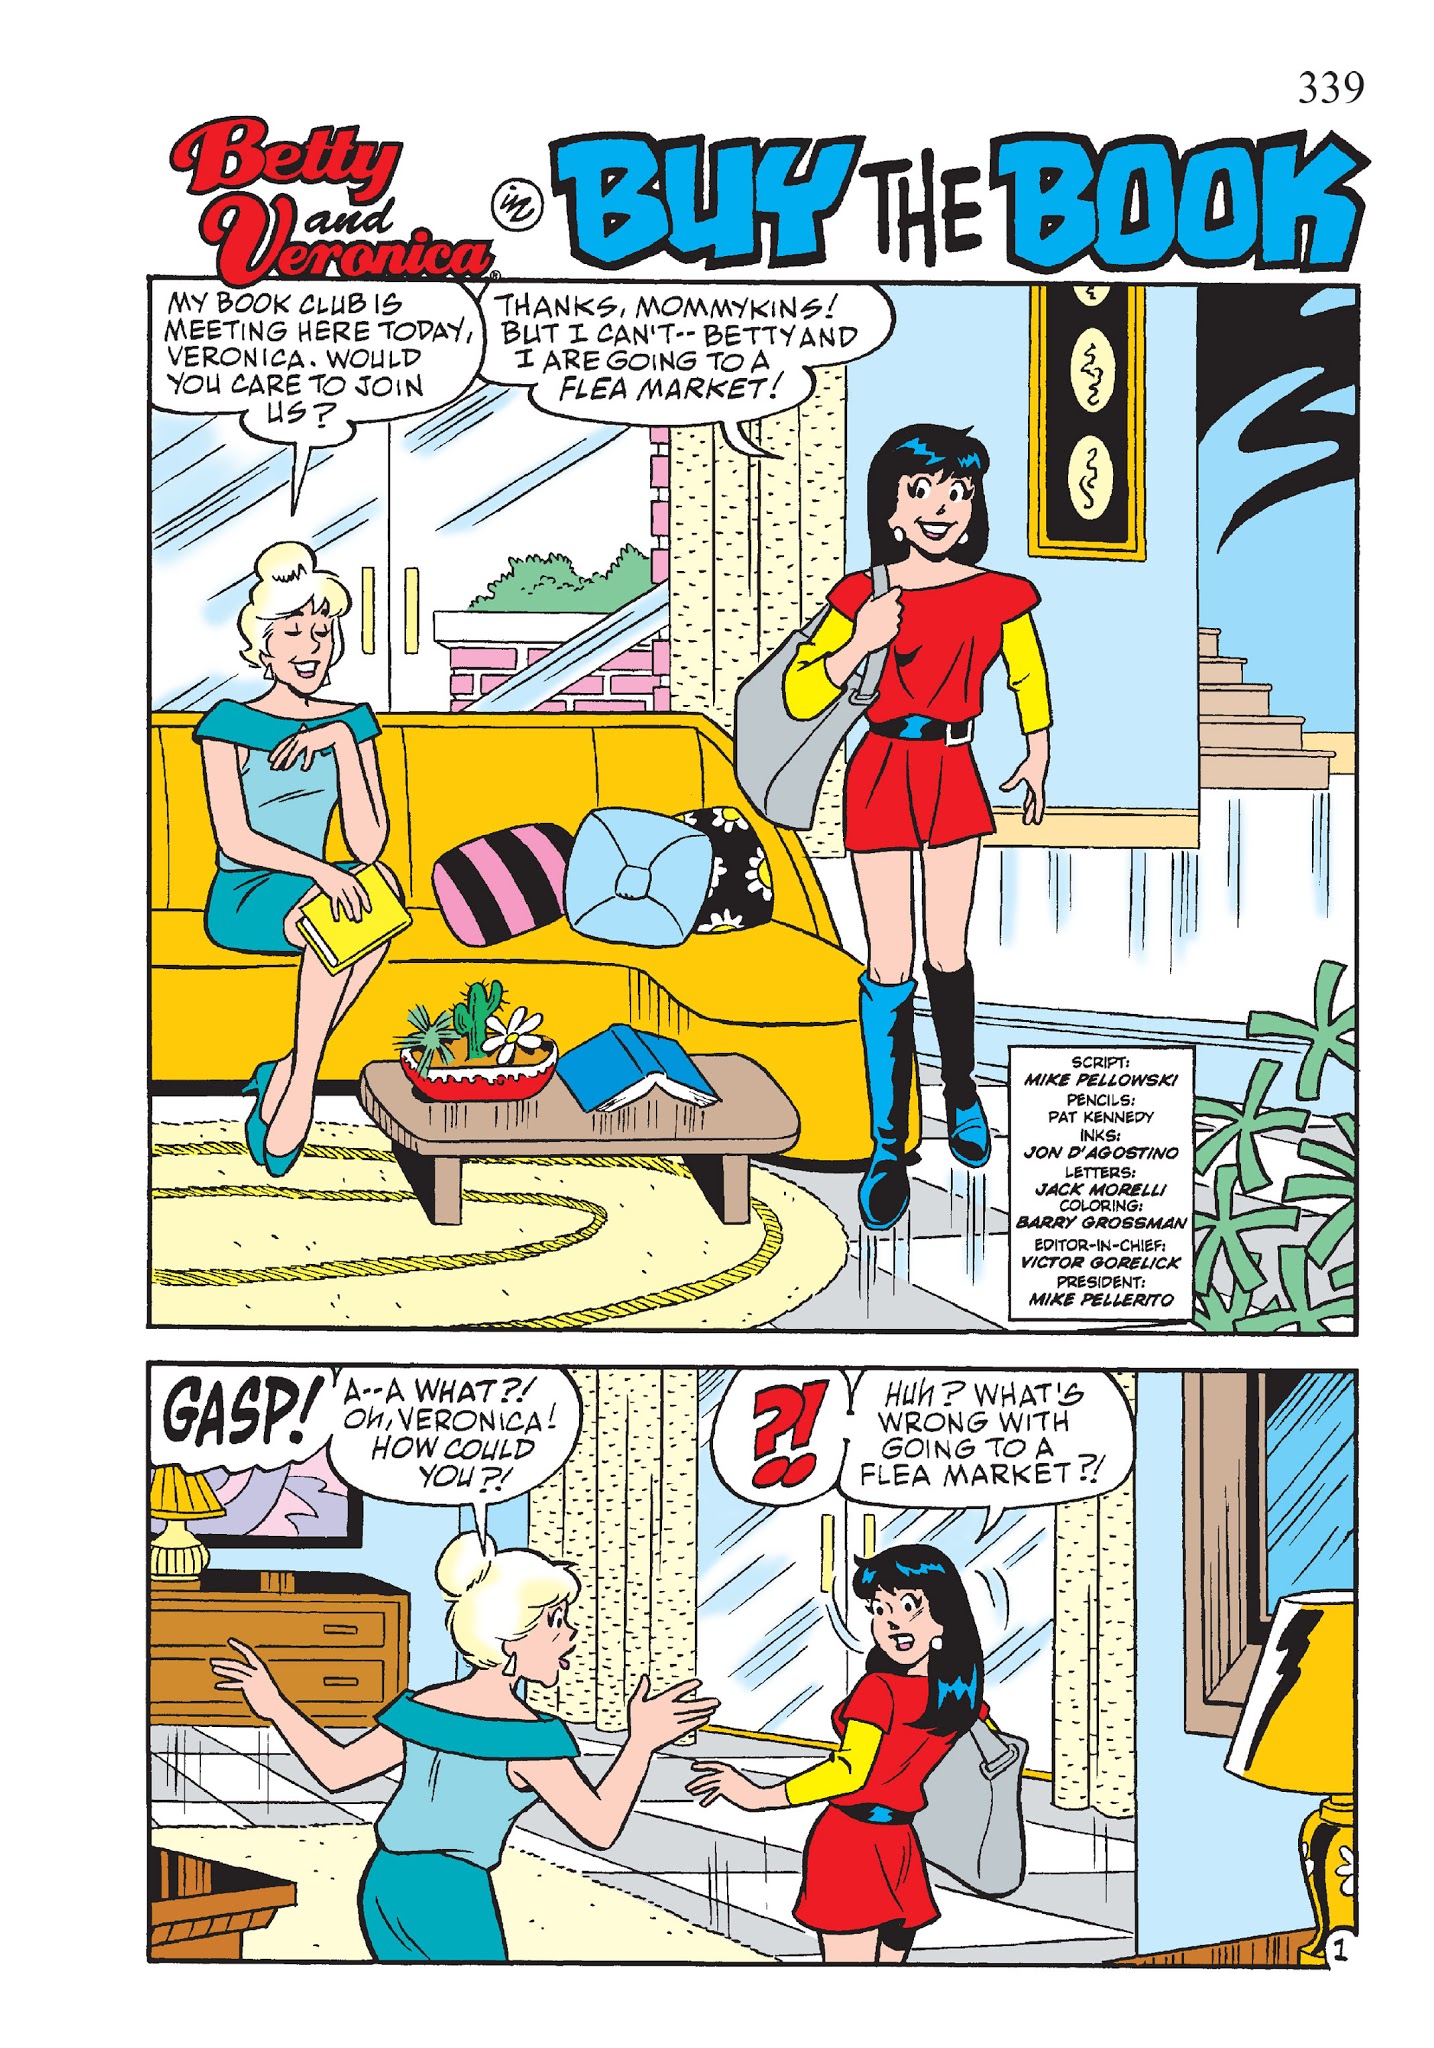 Read online The Best of Archie Comics: Betty & Veronica comic -  Issue # TPB - 340